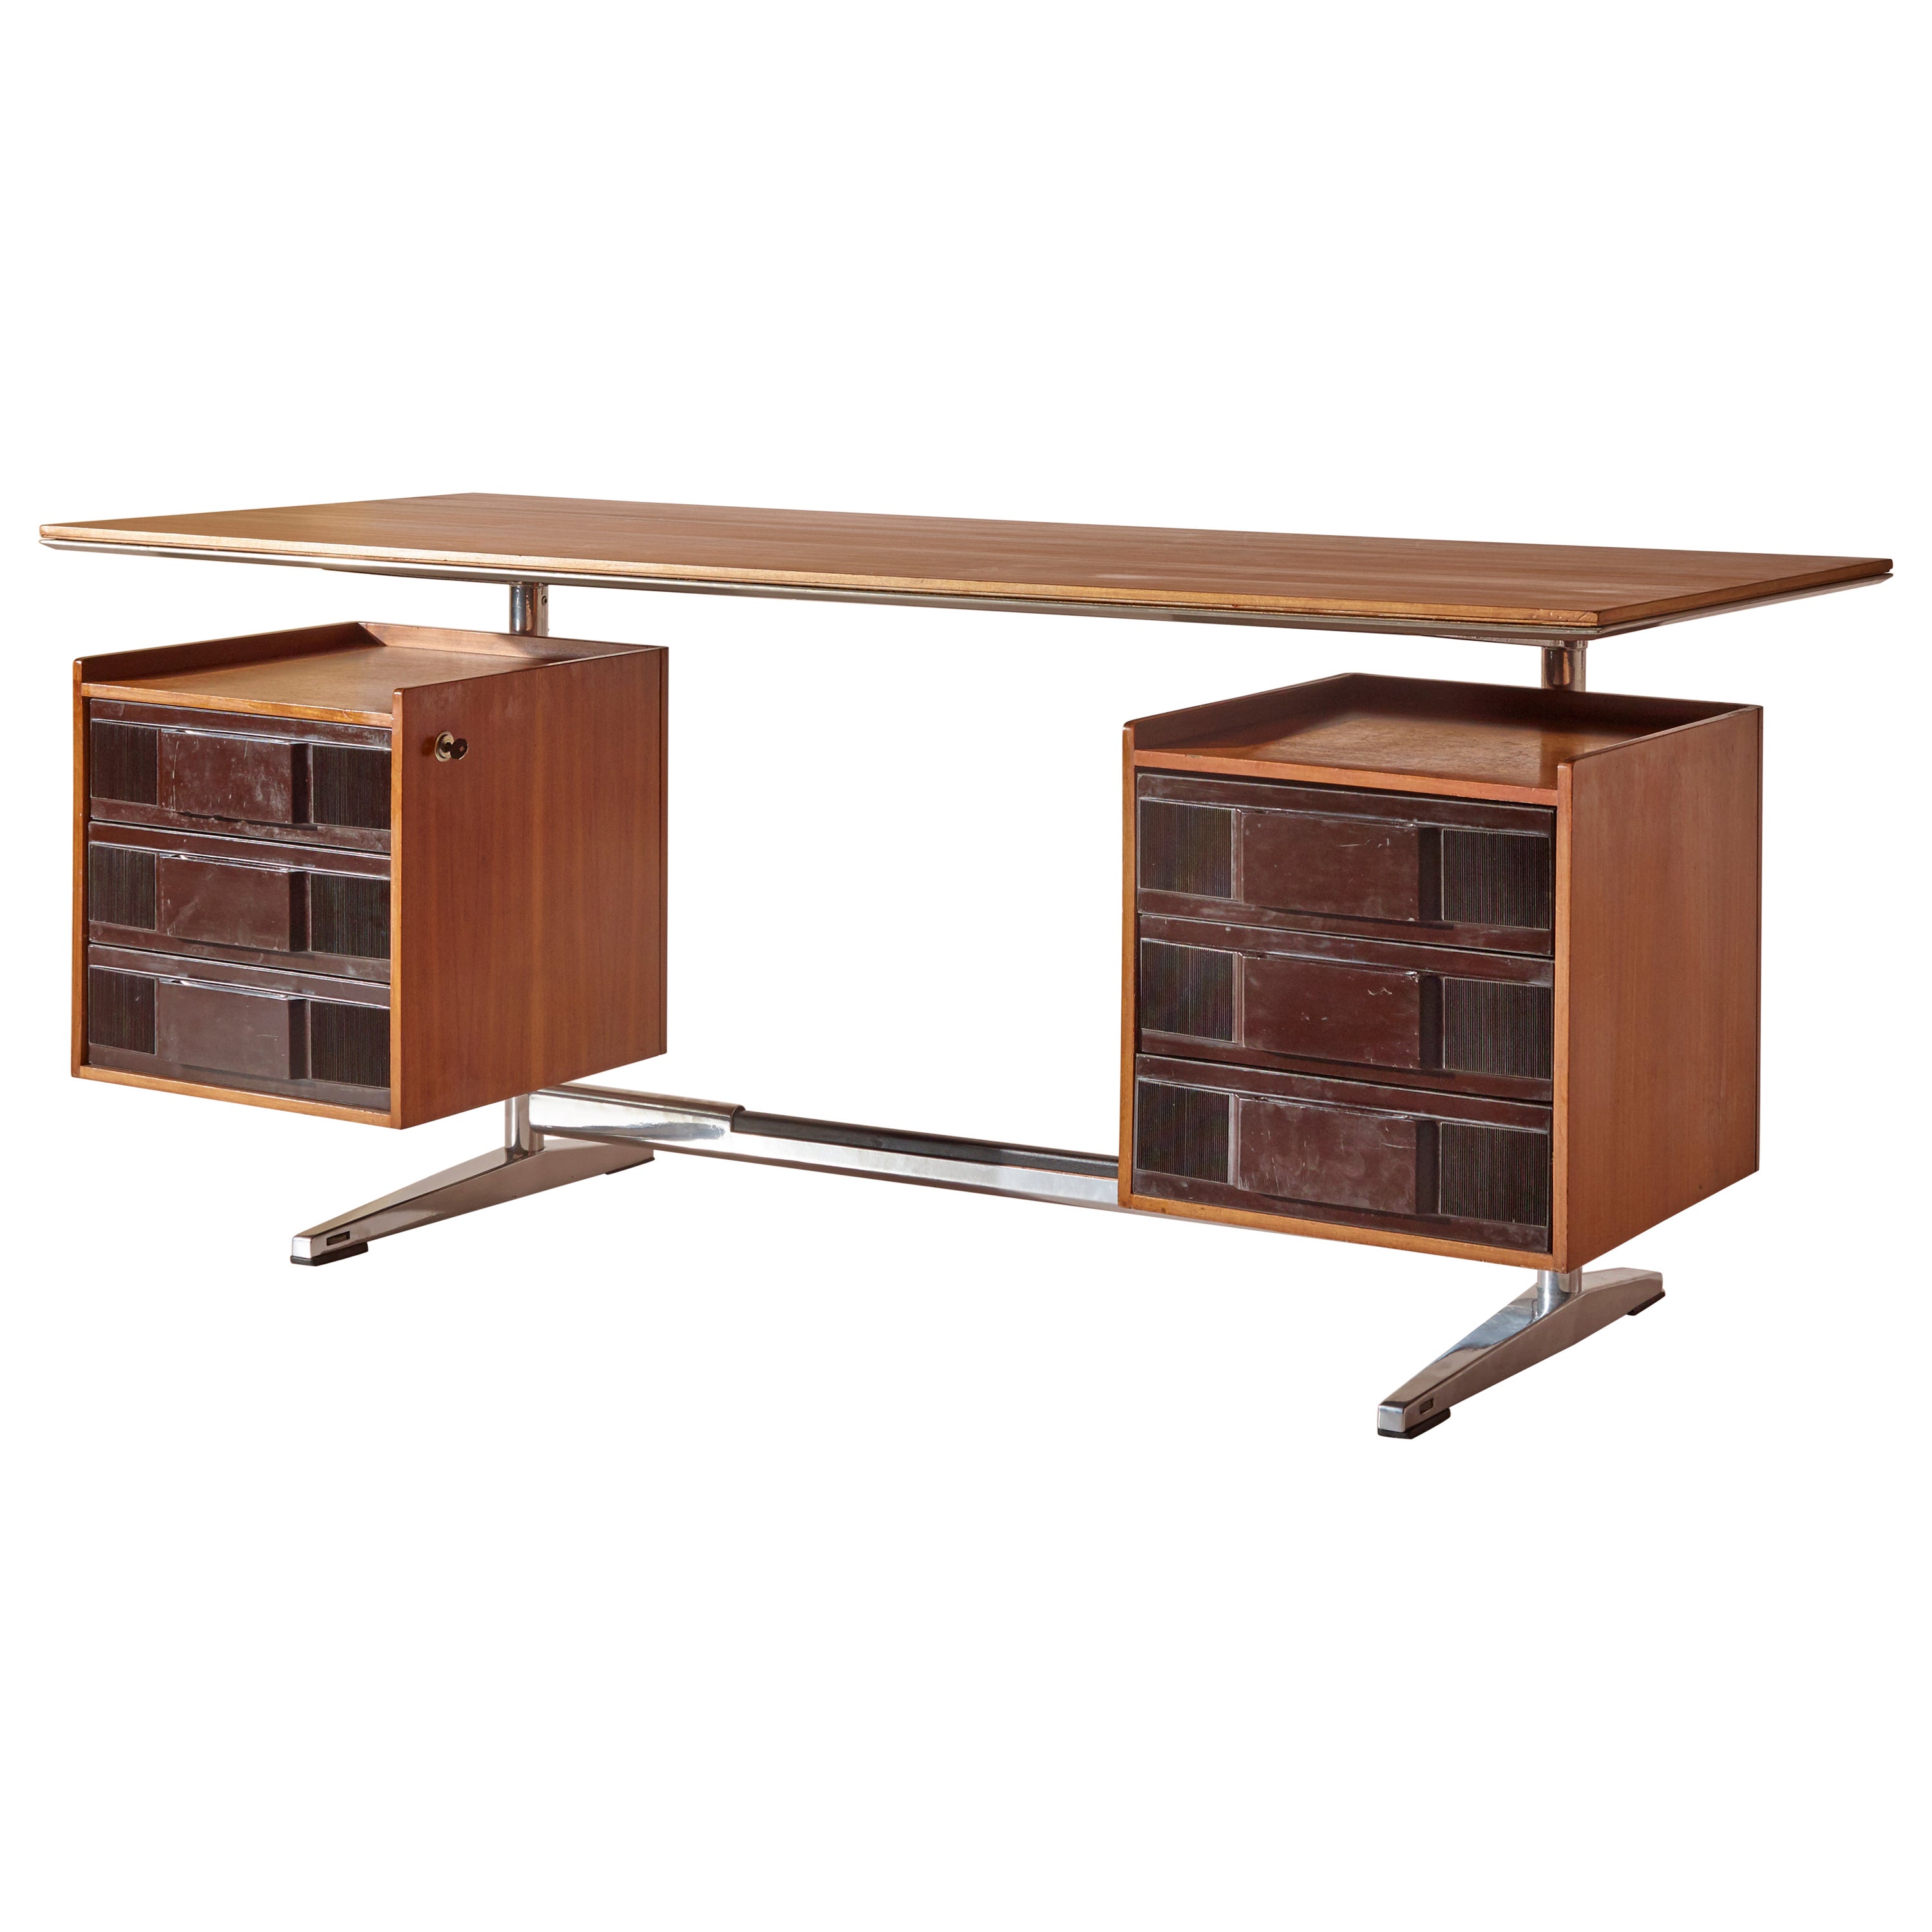 Gio Ponti Desk for RIMA Made in Walnut, Chromed Steel and Plastic. Italy, 1950s For Sale